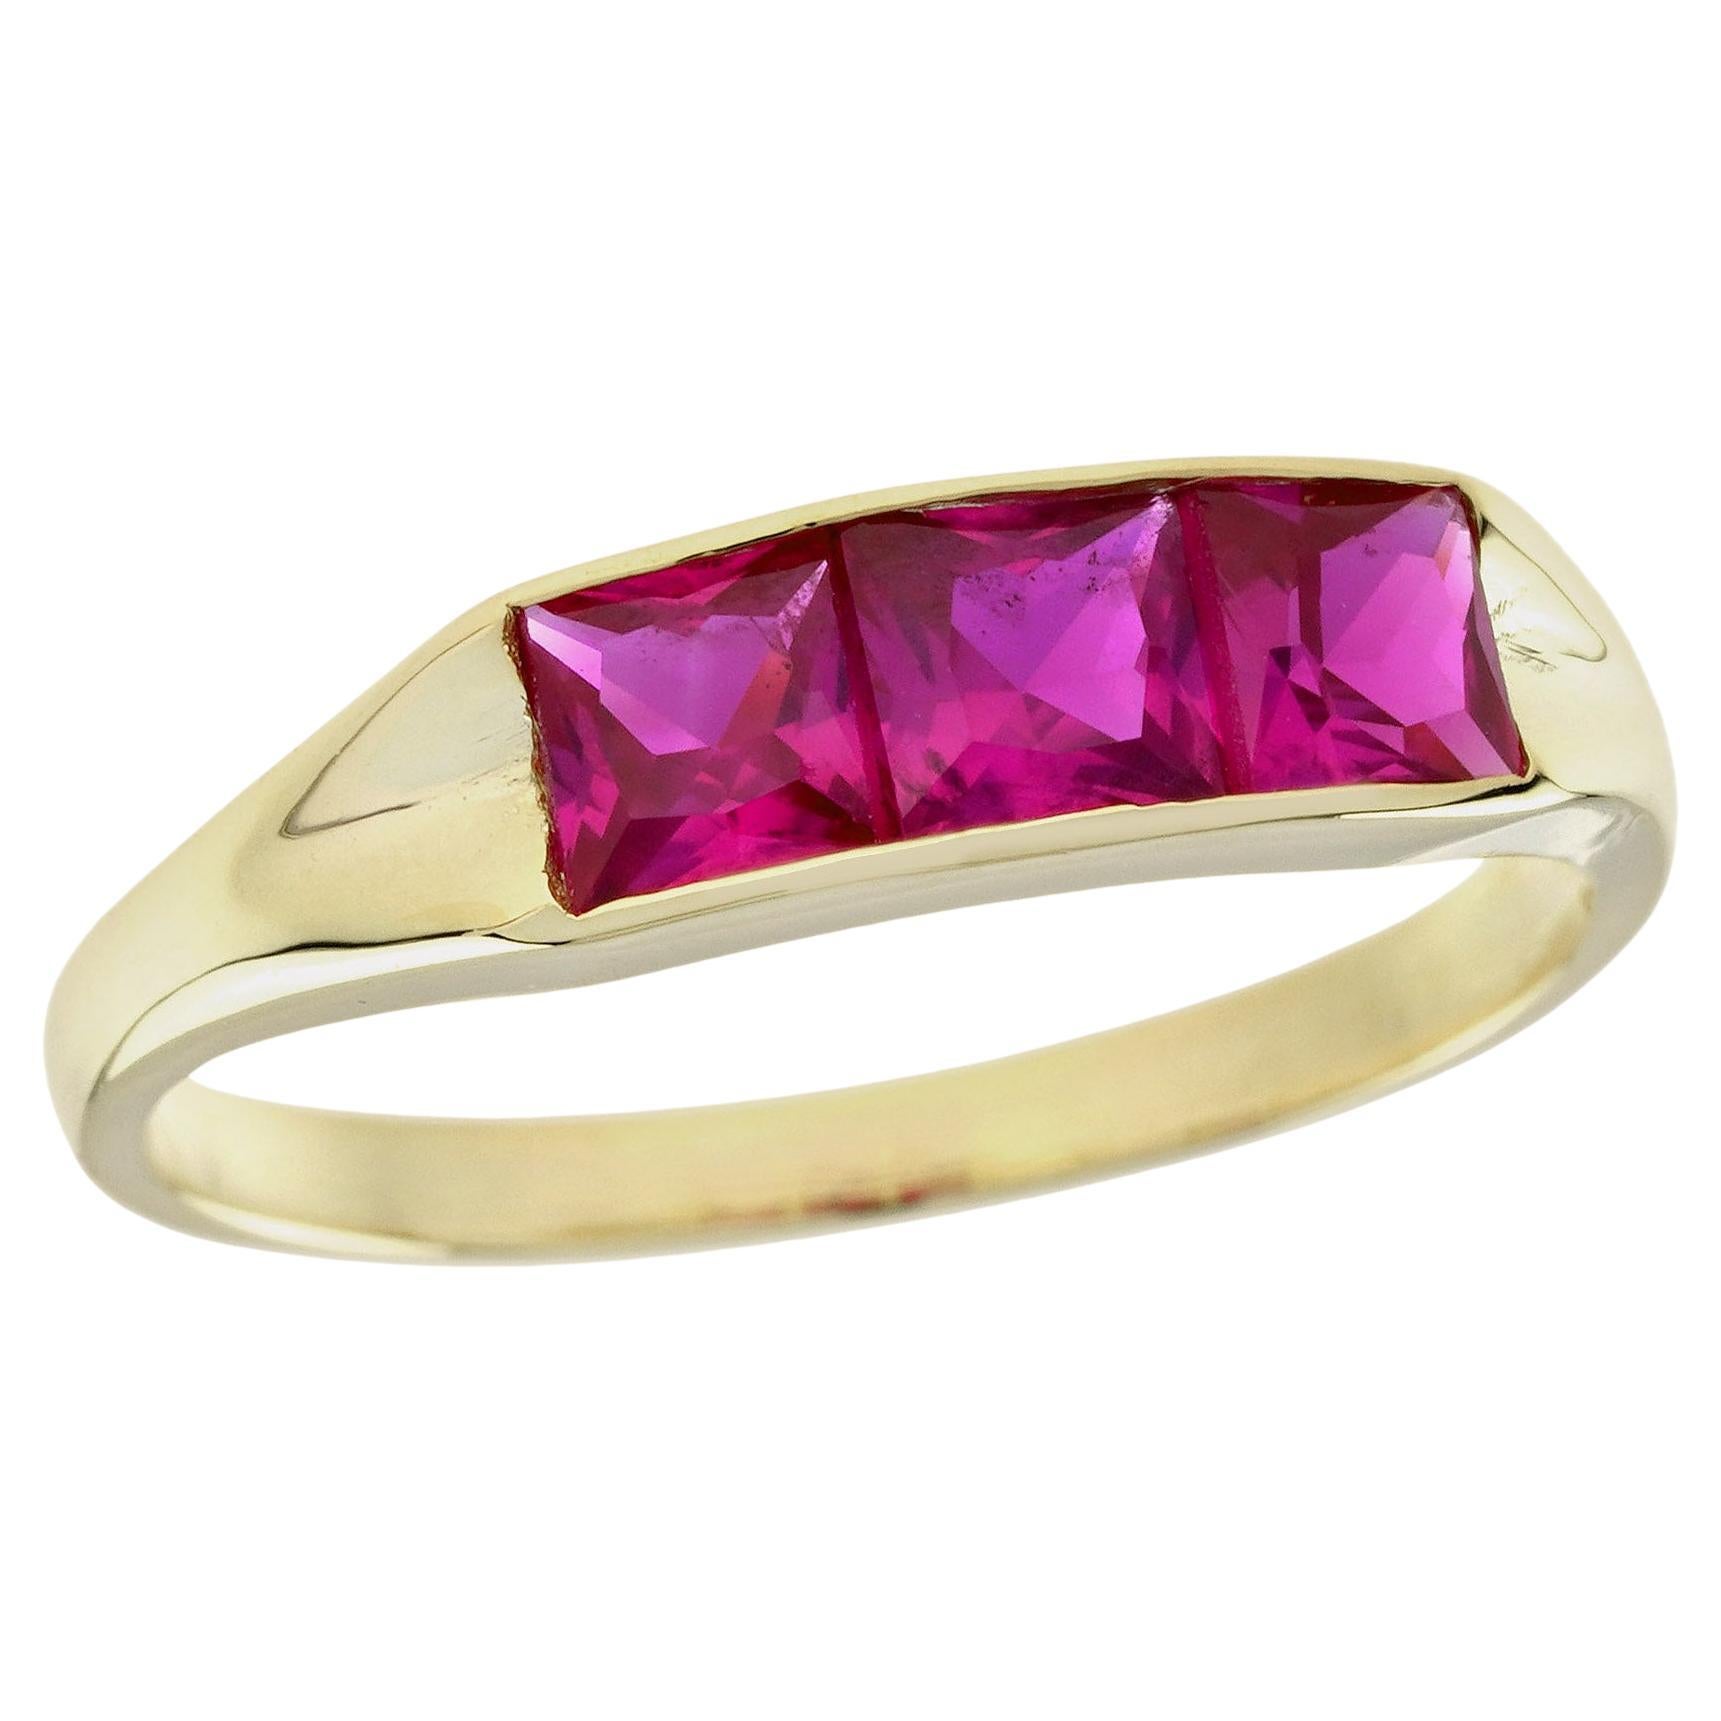 Natural Square Ruby Vintage Style Three Stone Ring in Solid 9K Yellow Gold